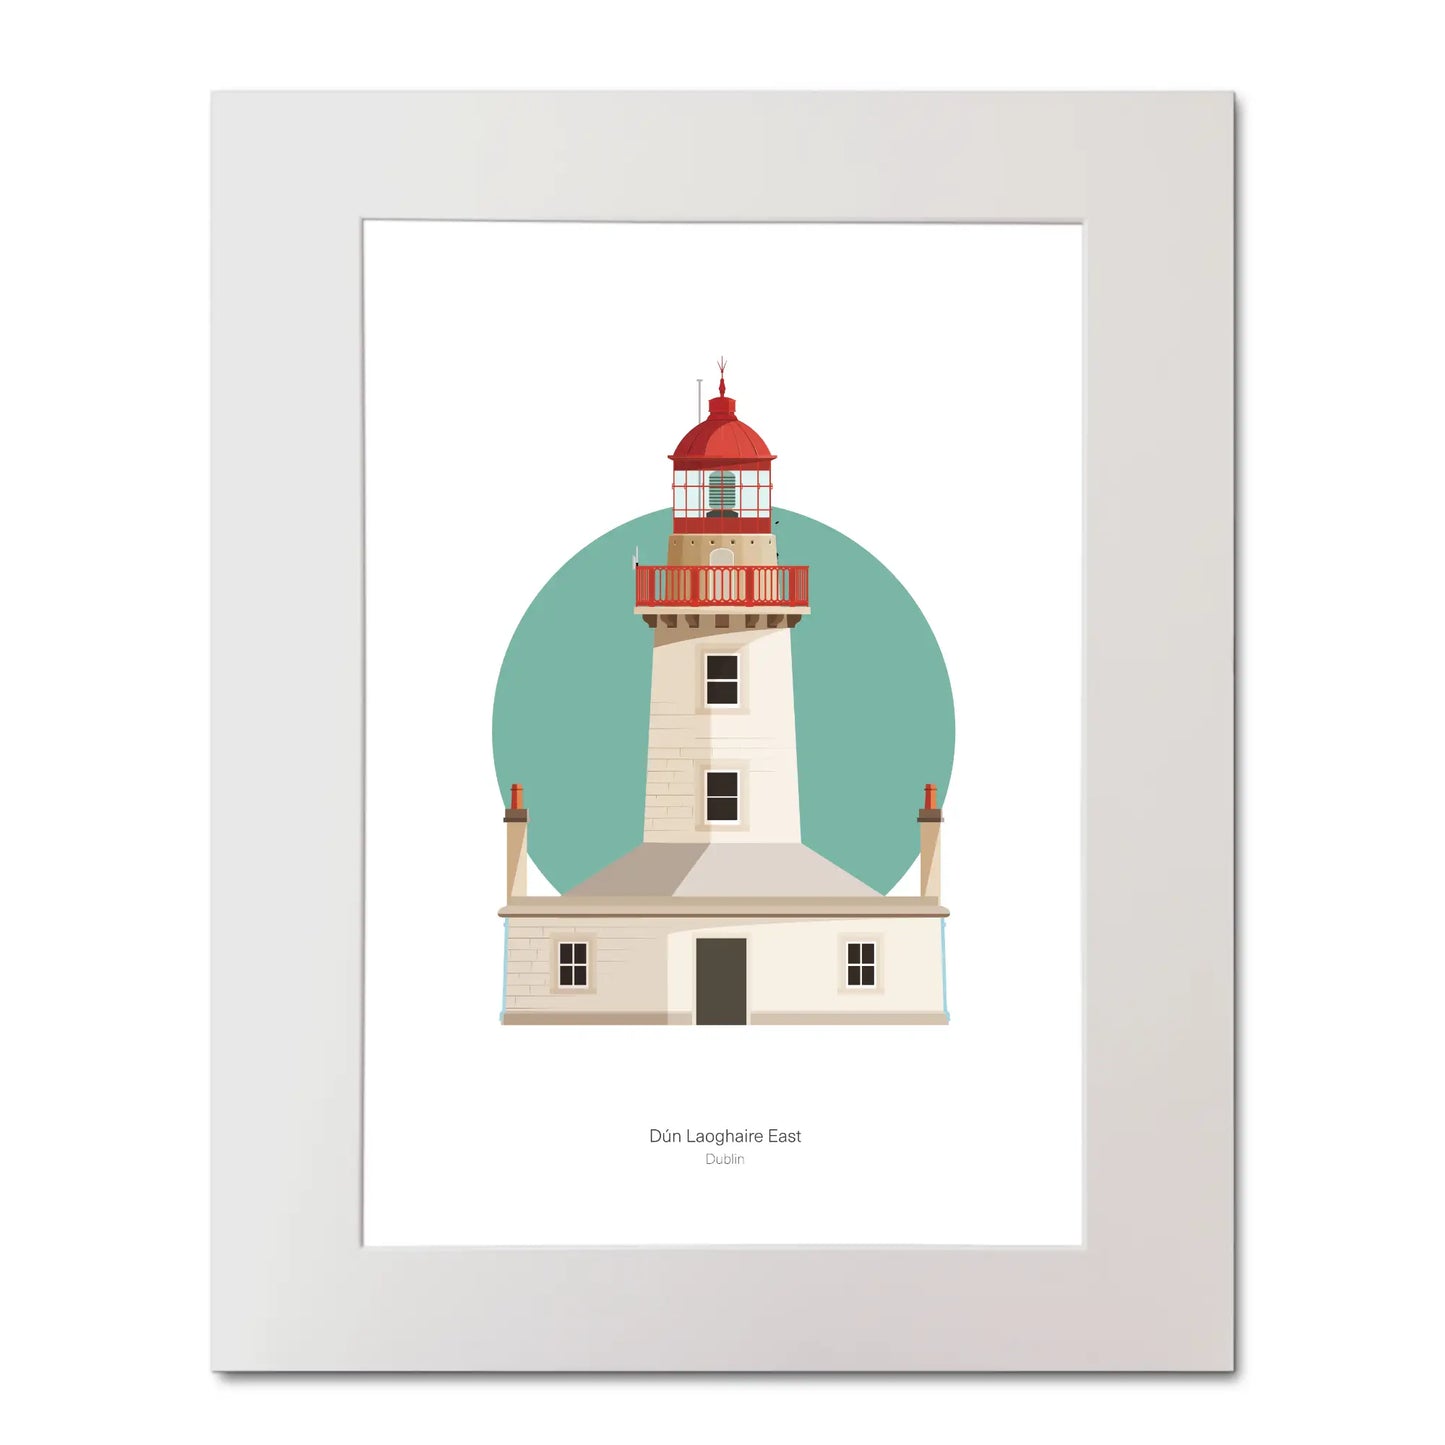 Illustration of Dún Laoghaire East lighthouse on a white background inside light blue square, mounted and measuring 40x50cm.